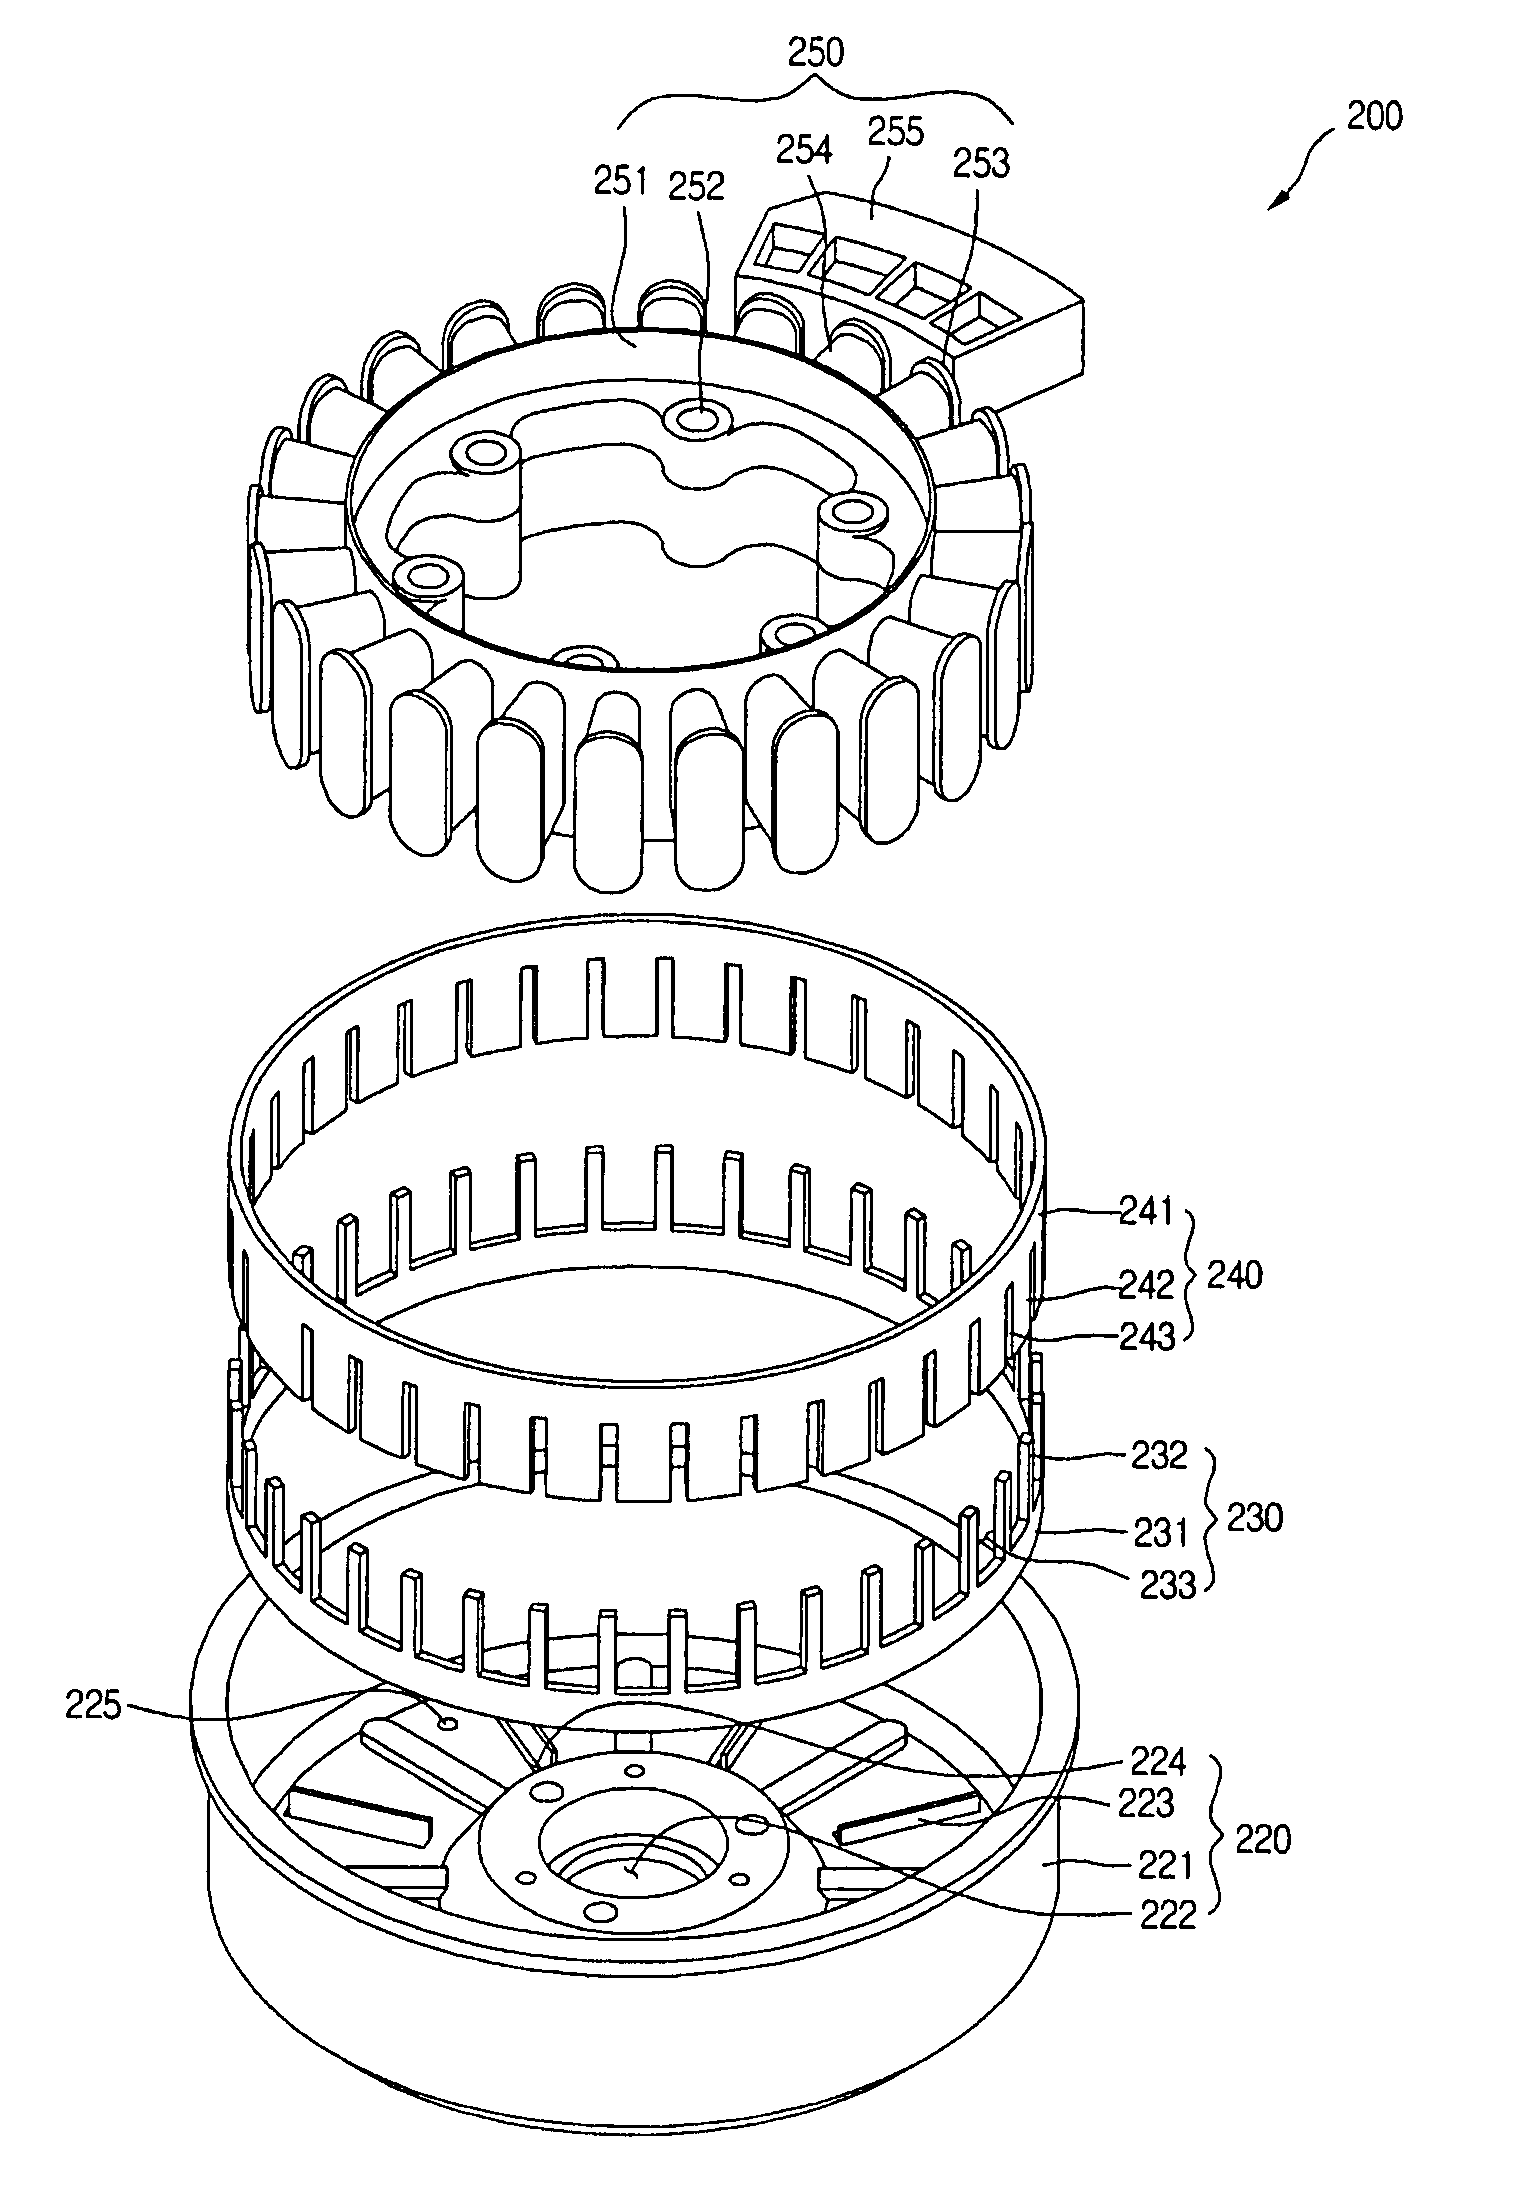 Motor and washing machine including the same